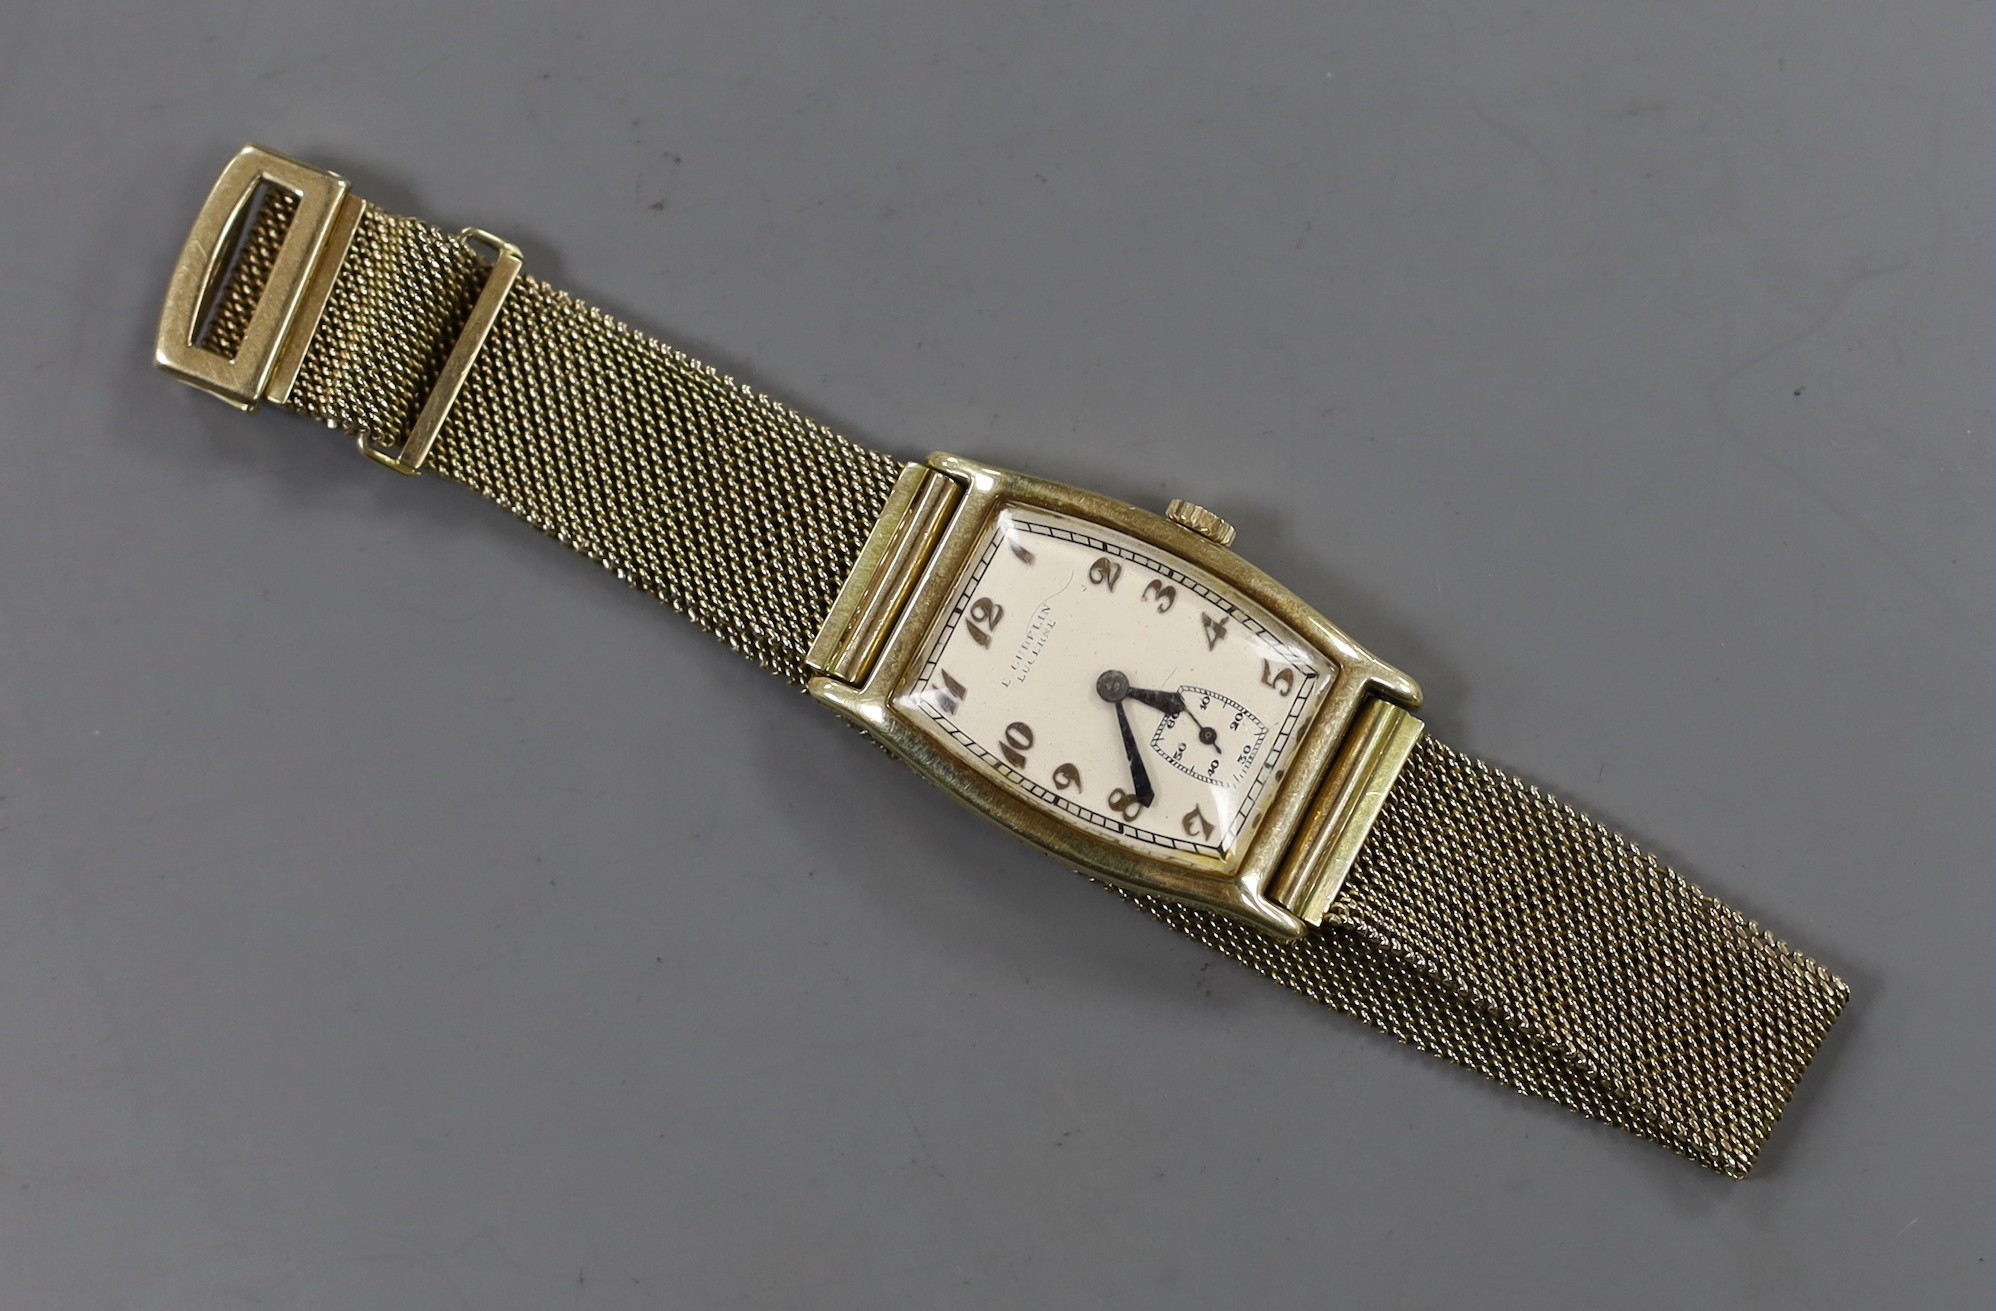 A gentleman's 14k tonneau shaped manual wind wrist watch, retailed by E. Cubelin, with Arabic dial and subsidiary seconds, on associated 9ct gold mesh link bracelet